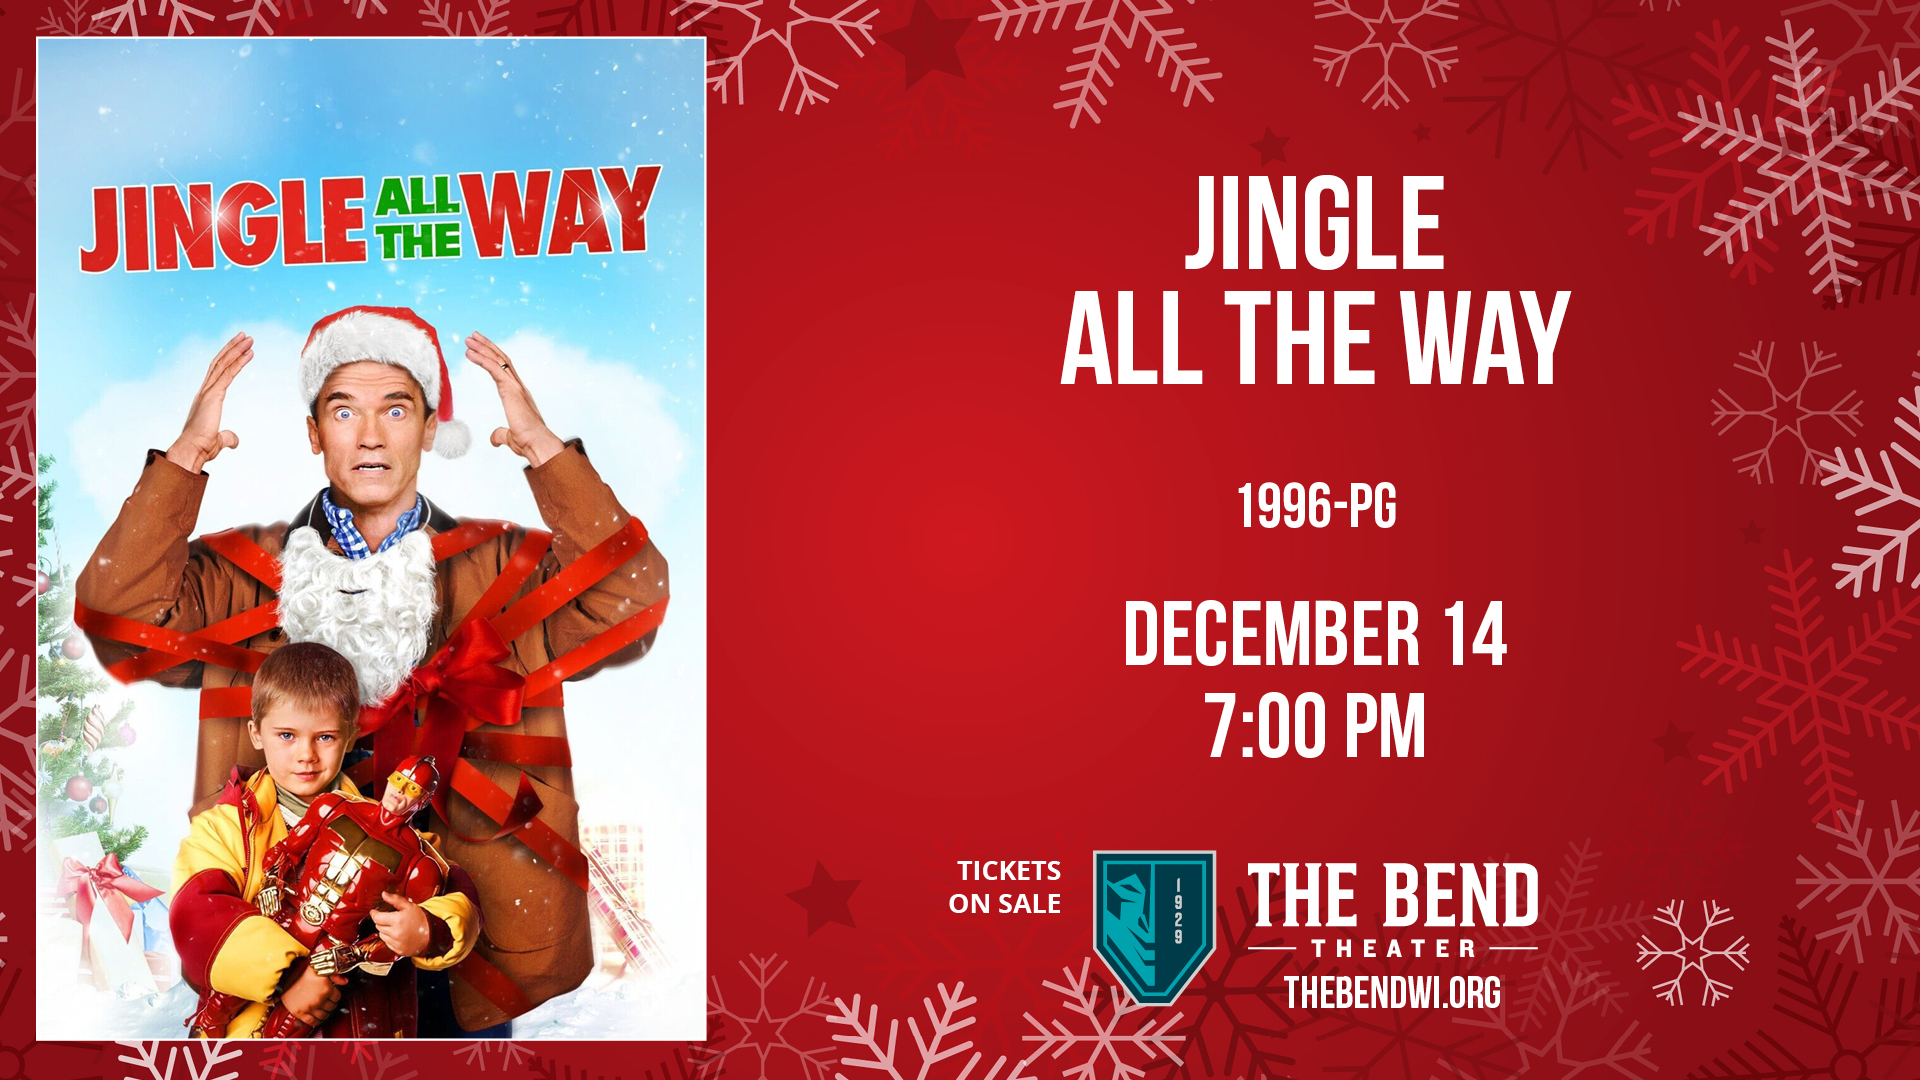 Jingle All the Way at The Bend Theater